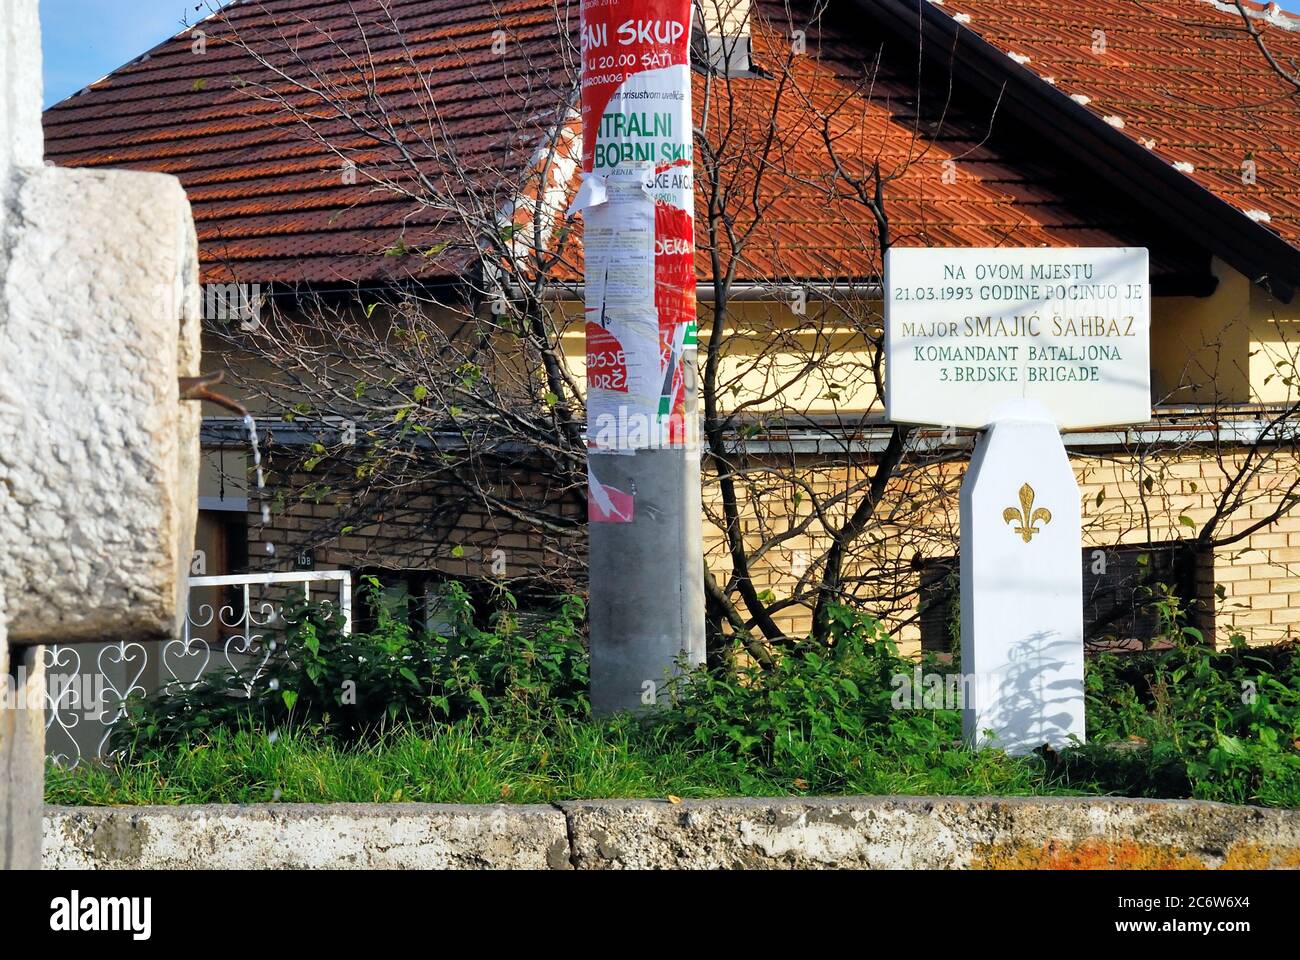 Bosnia and Herzegovina, Sarajevo, The monument at Smajic Sahbaz. At this place in 21, 3, 1993, Smajc Sahbaz commander of the battalion of the 3rd hill brigade, was killed. Stock Photo